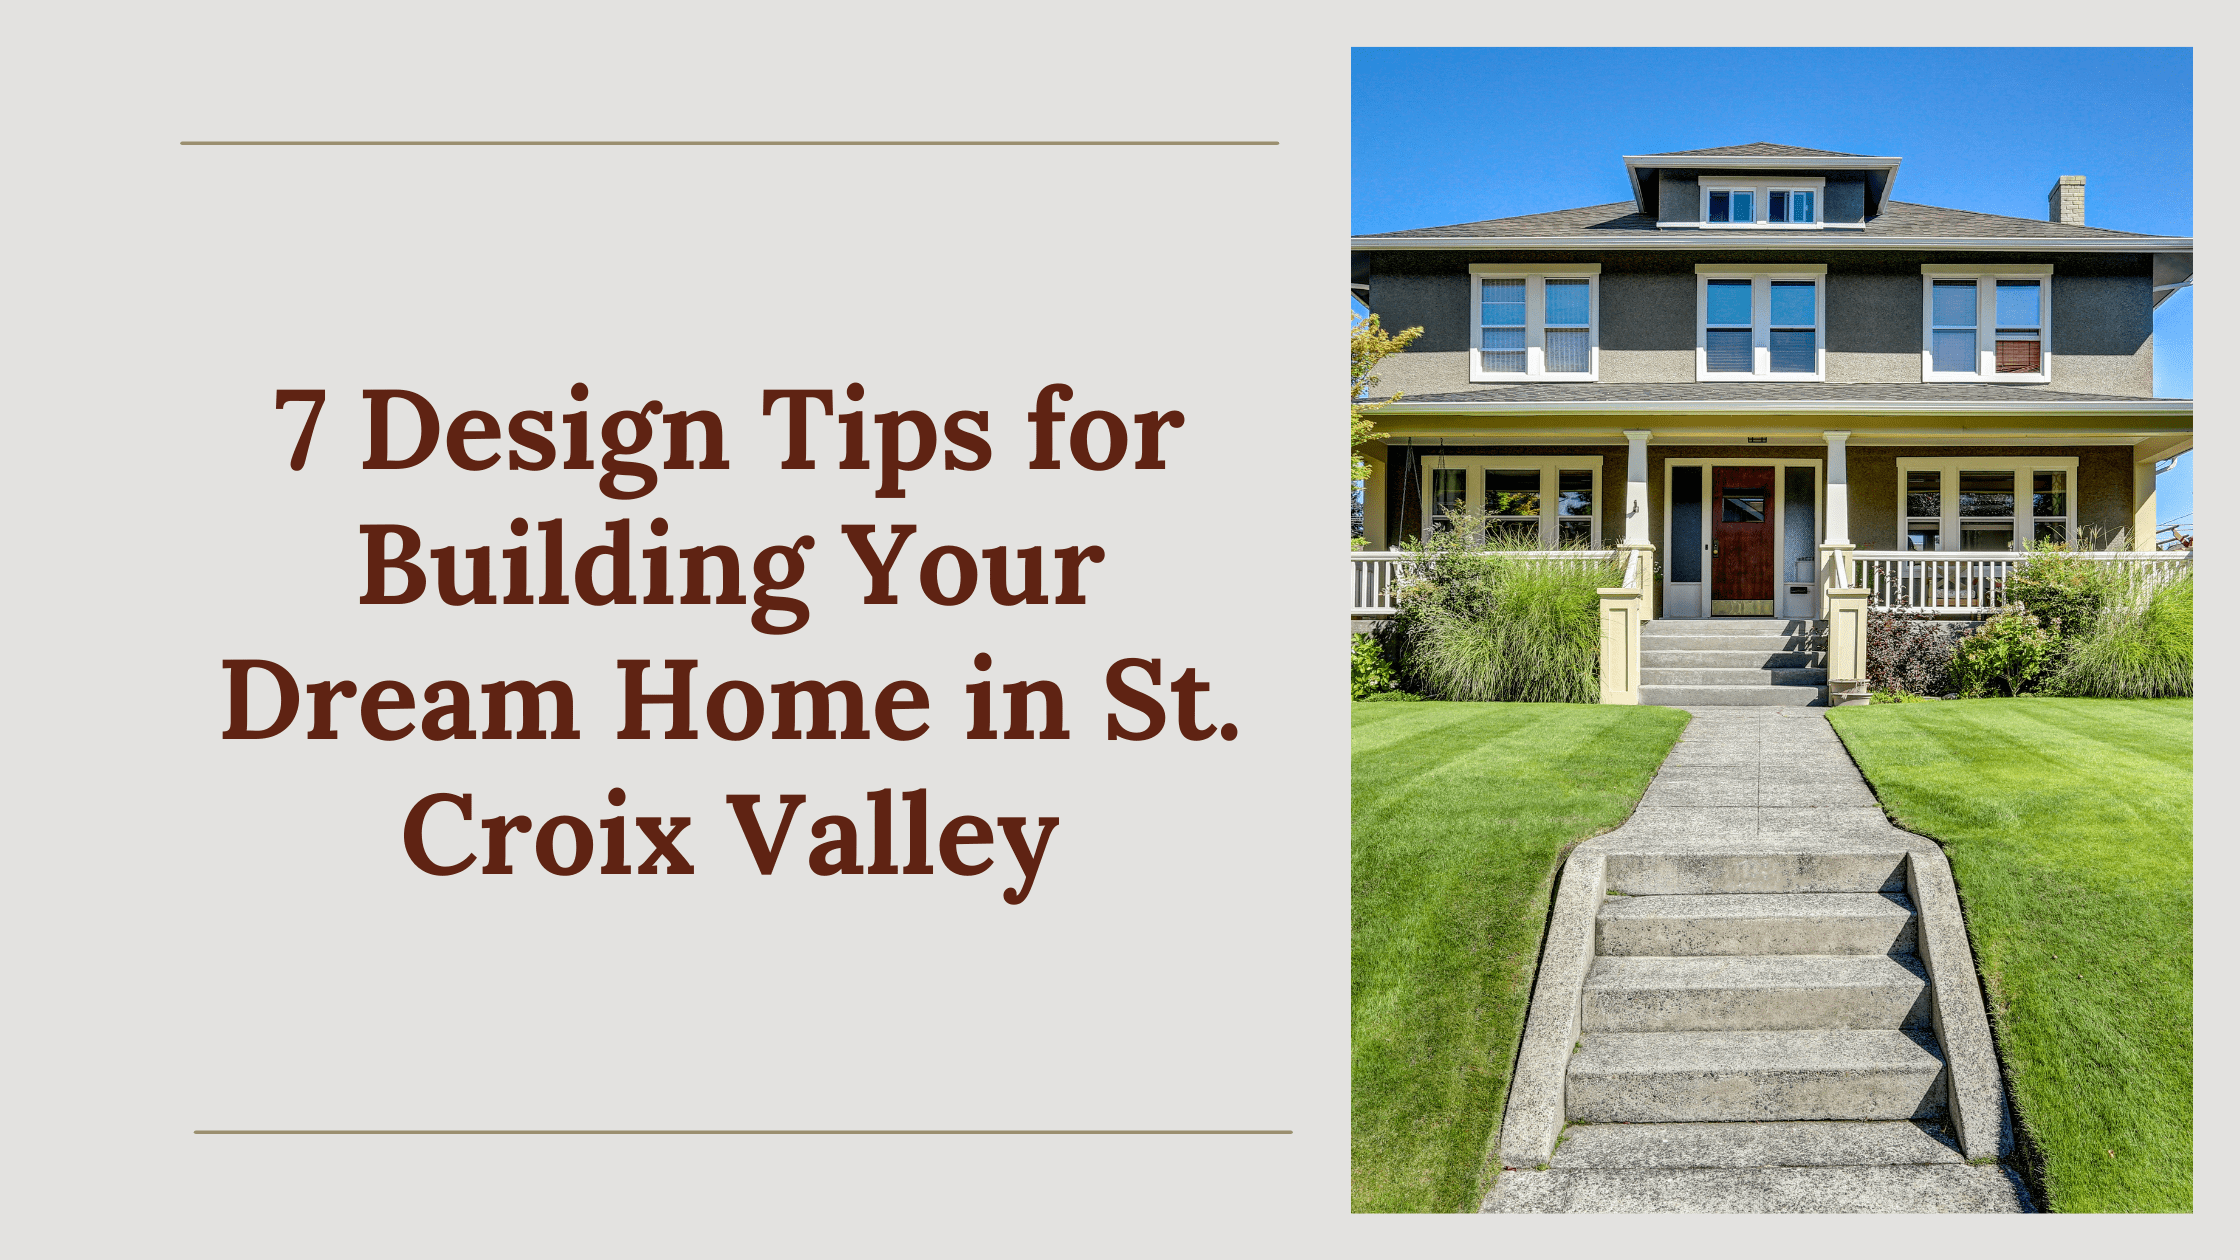 7 Design Tips for Building Your Dream Home in St. Croix Valley